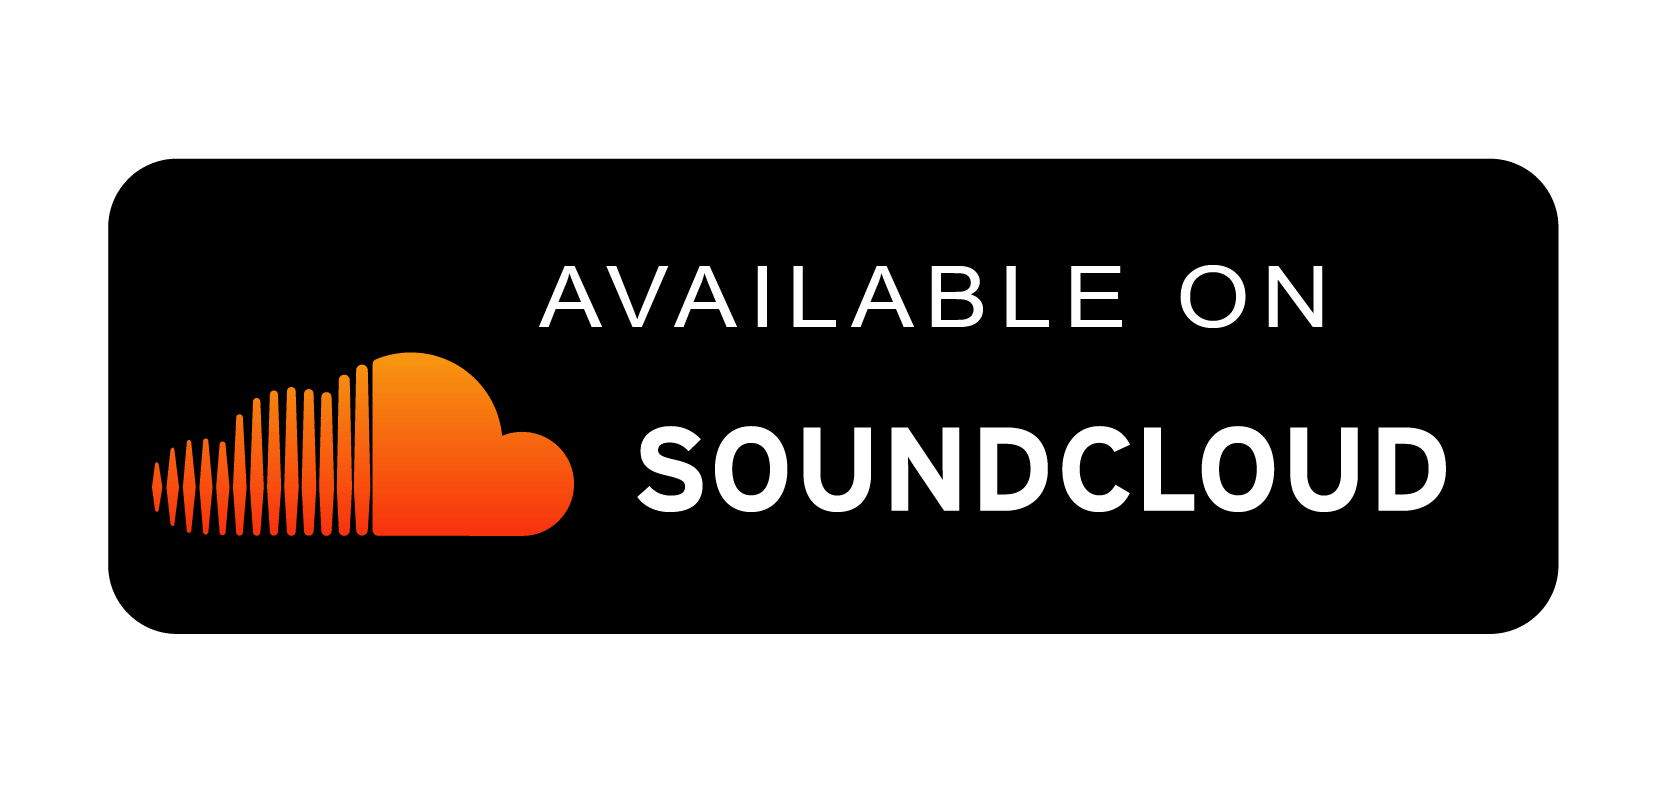 Soundcloud Logo With The Words Available On Soundcloud